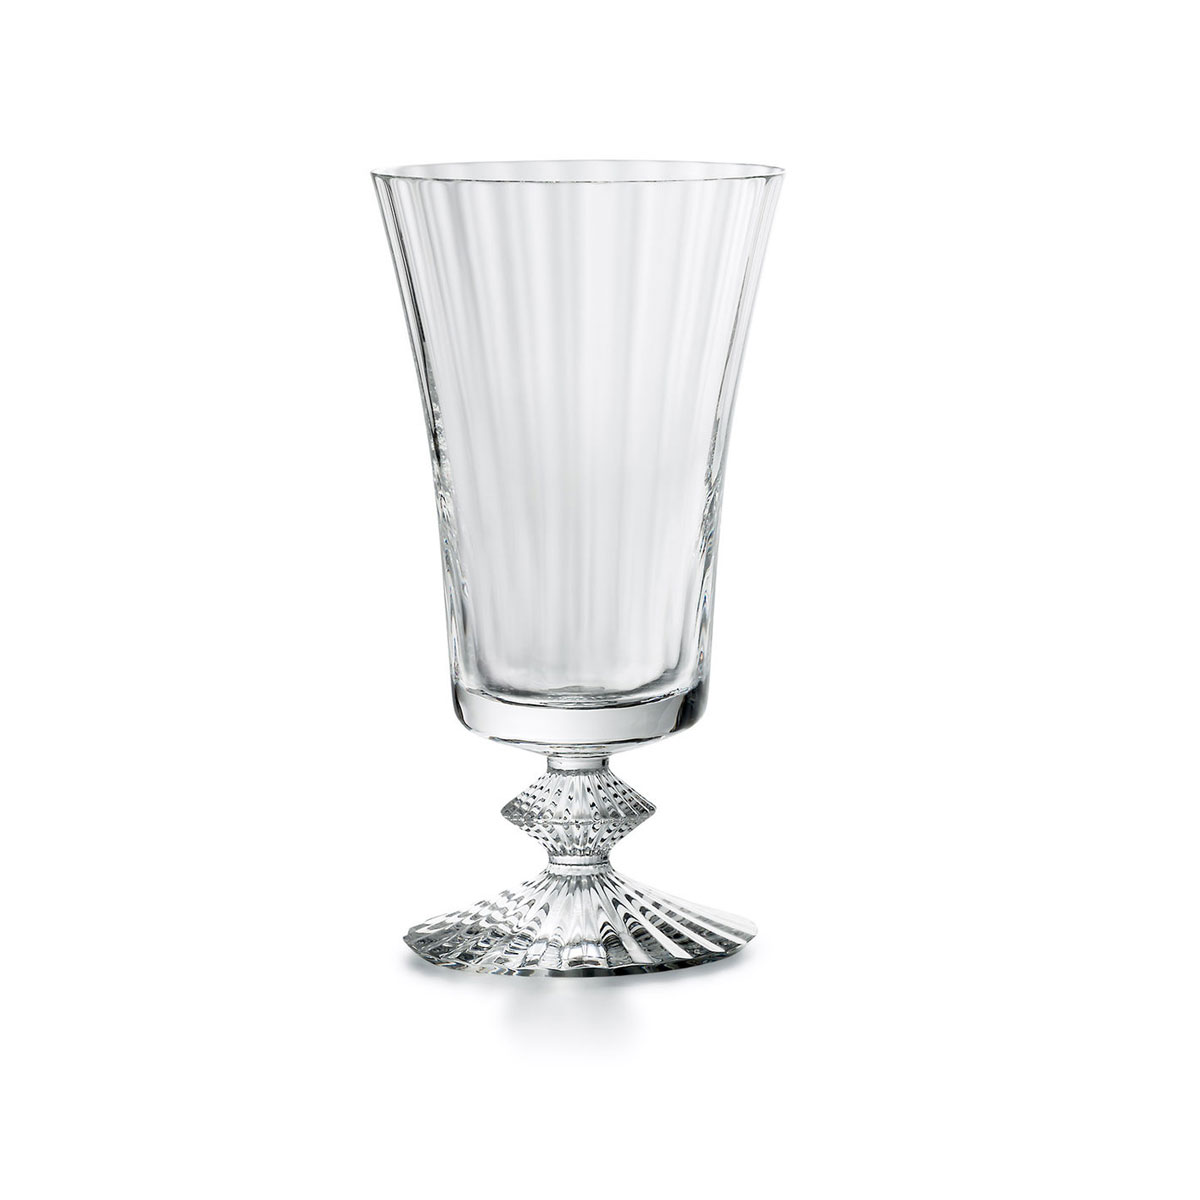 Baccarat Crystal, Mille Nuits Water No. 1, Single